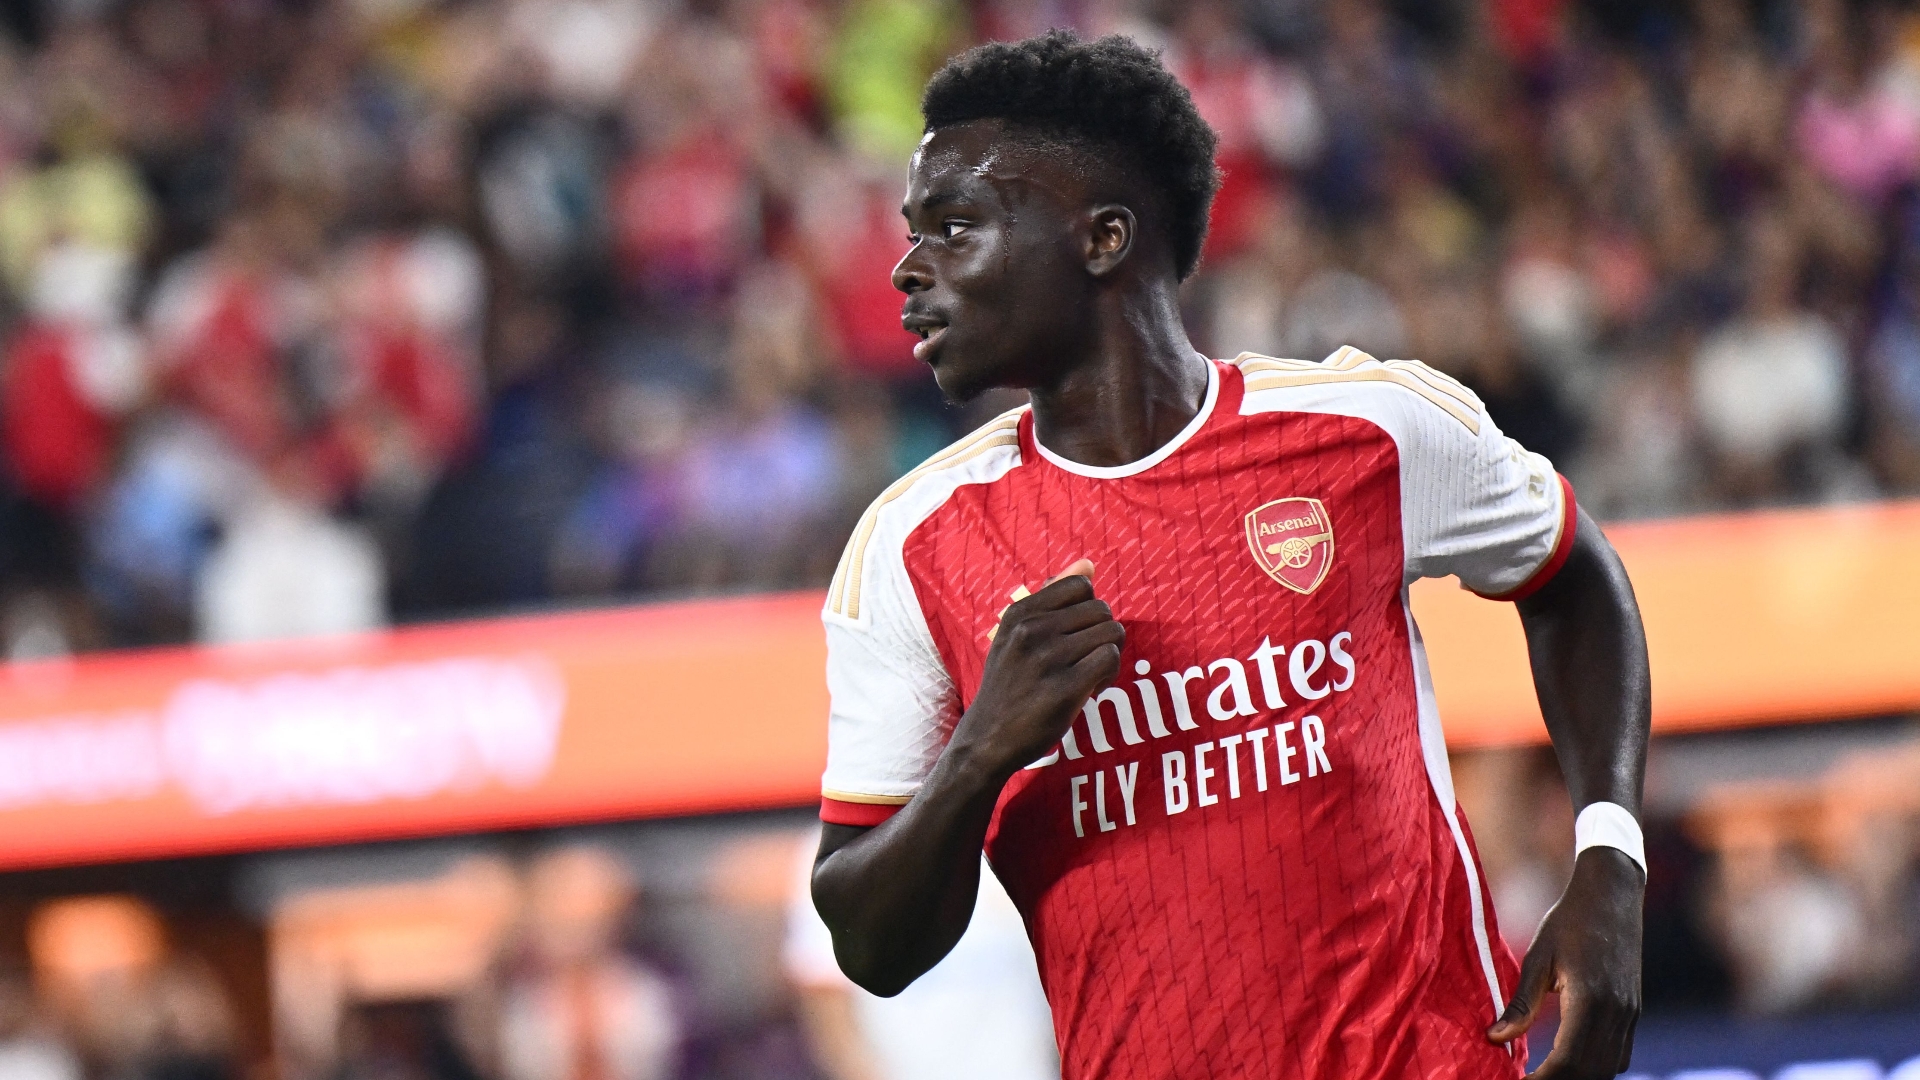 Arsenal vs Man United Predictions More Home Goals for Saka in the